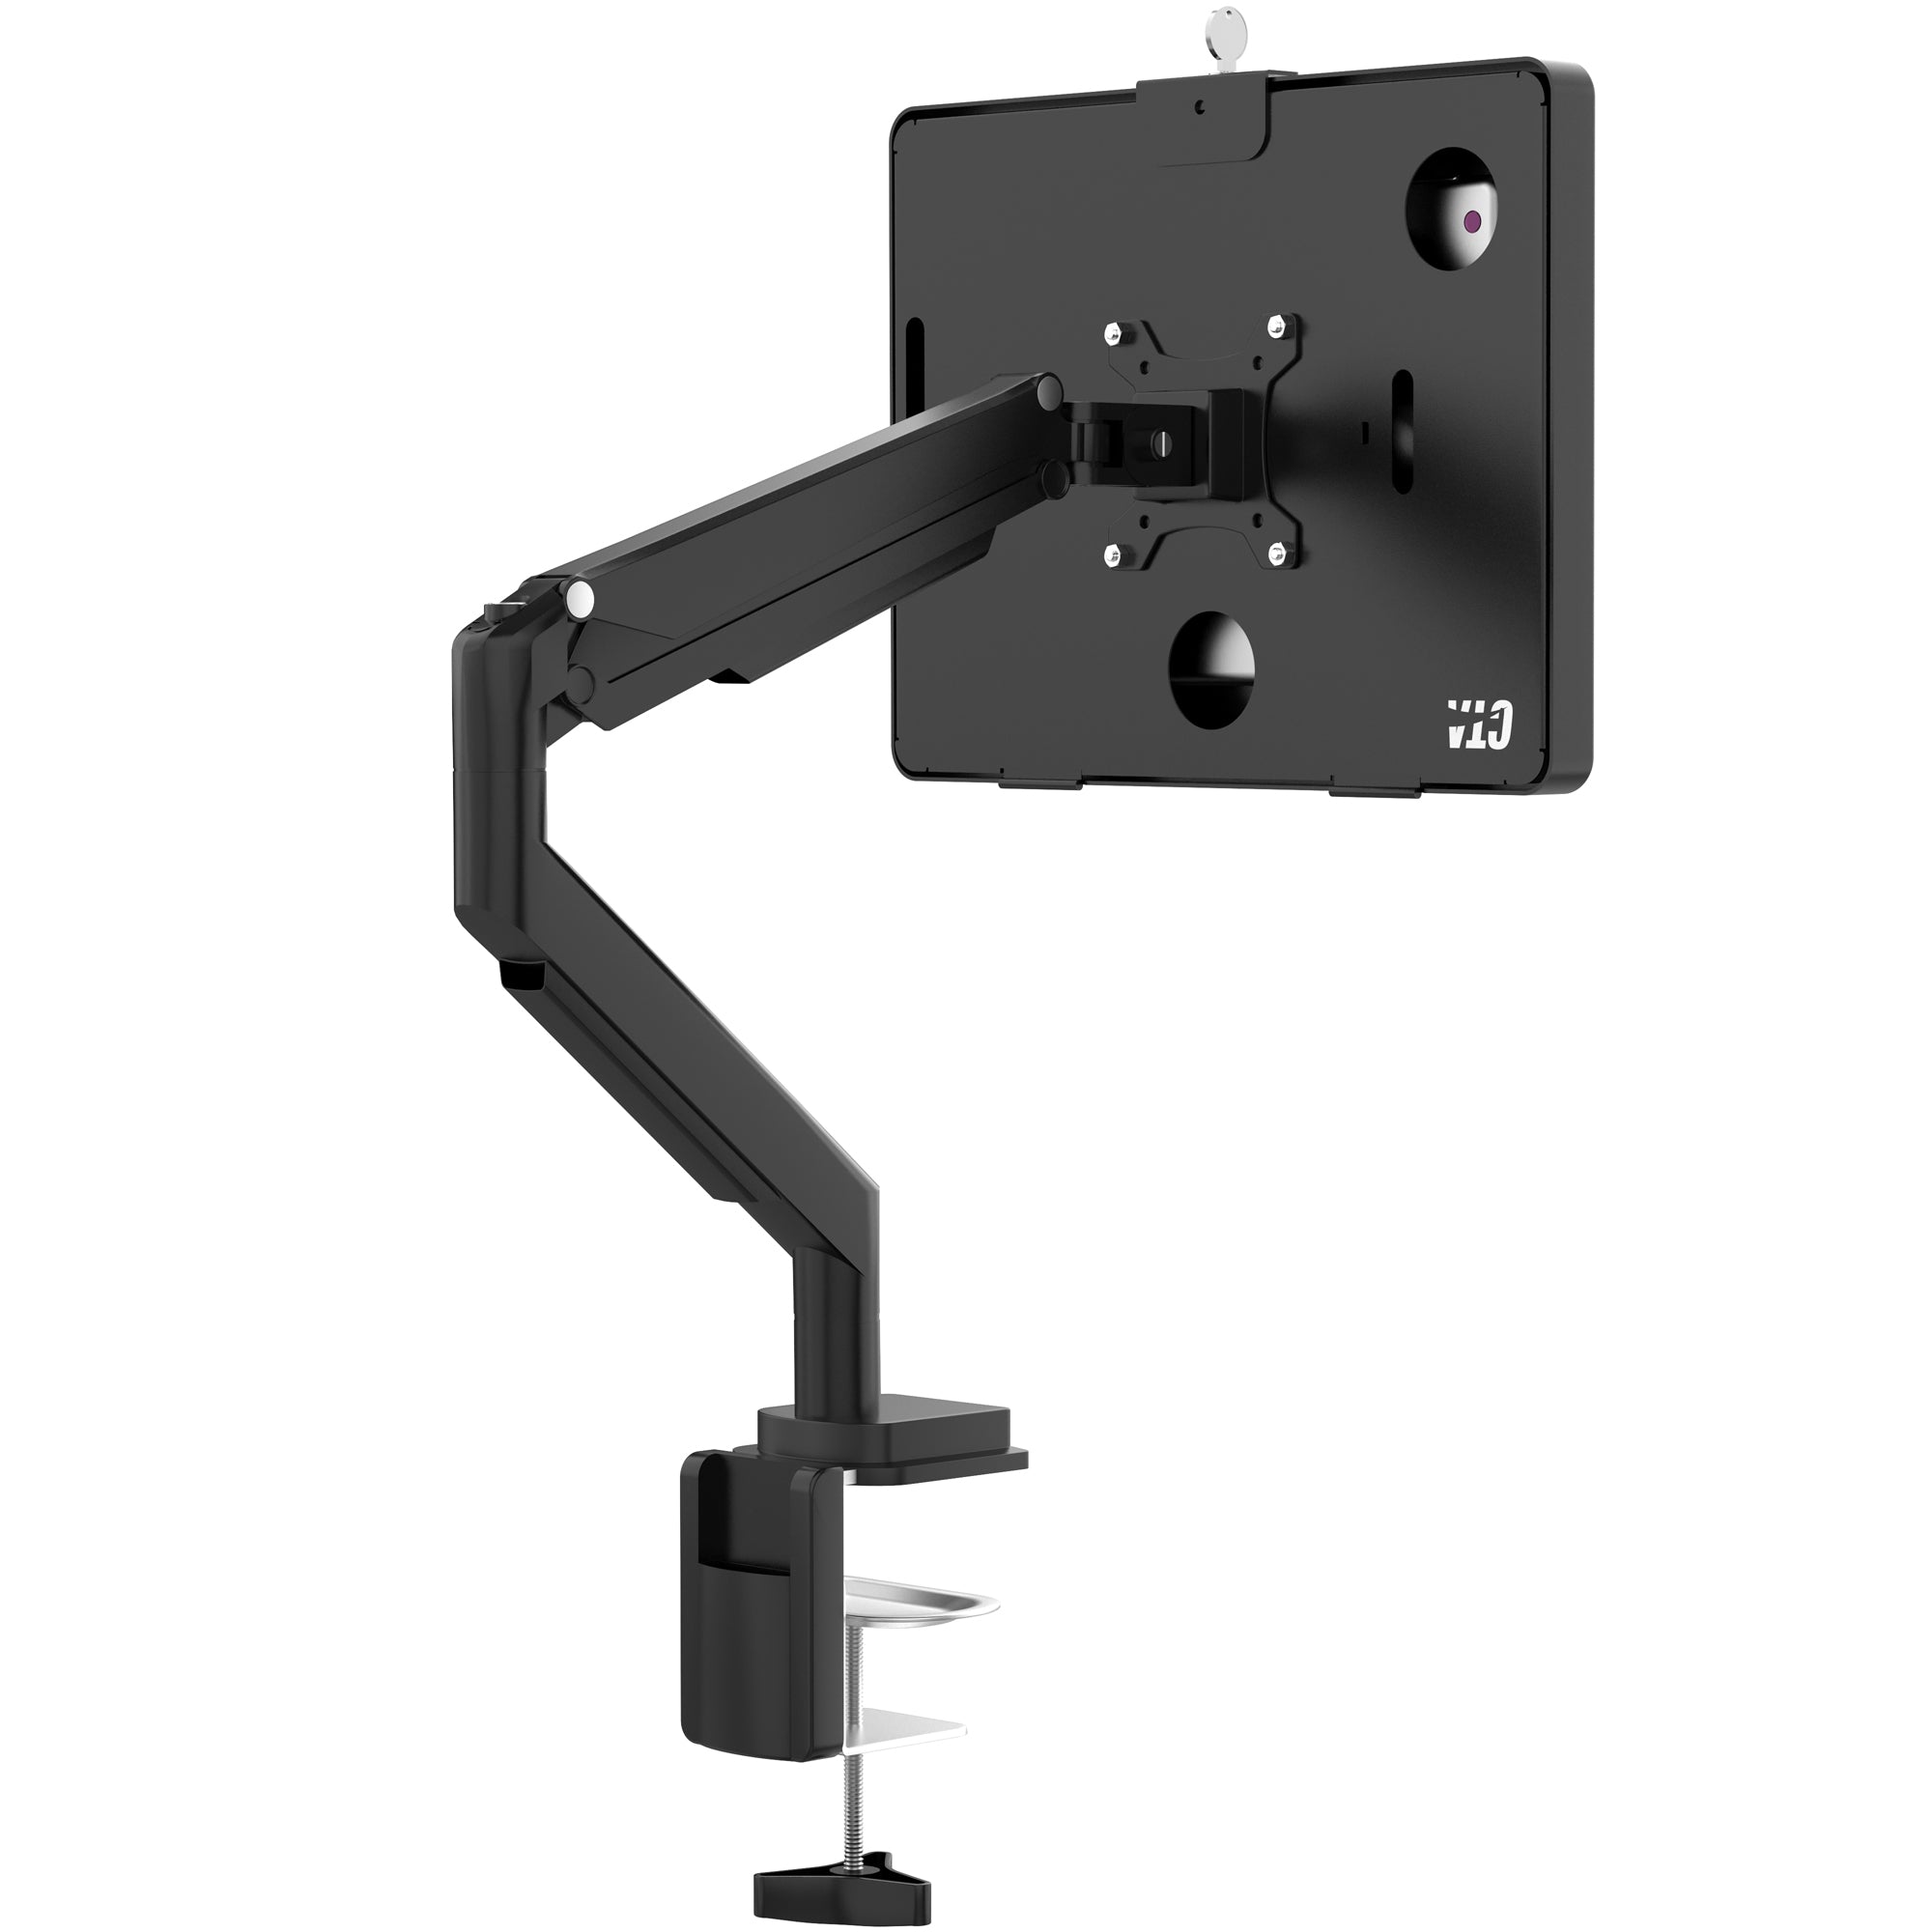 Locking Tablet Mount and USB Hub w/ Full Cable Management w/ Paragon Enclosure